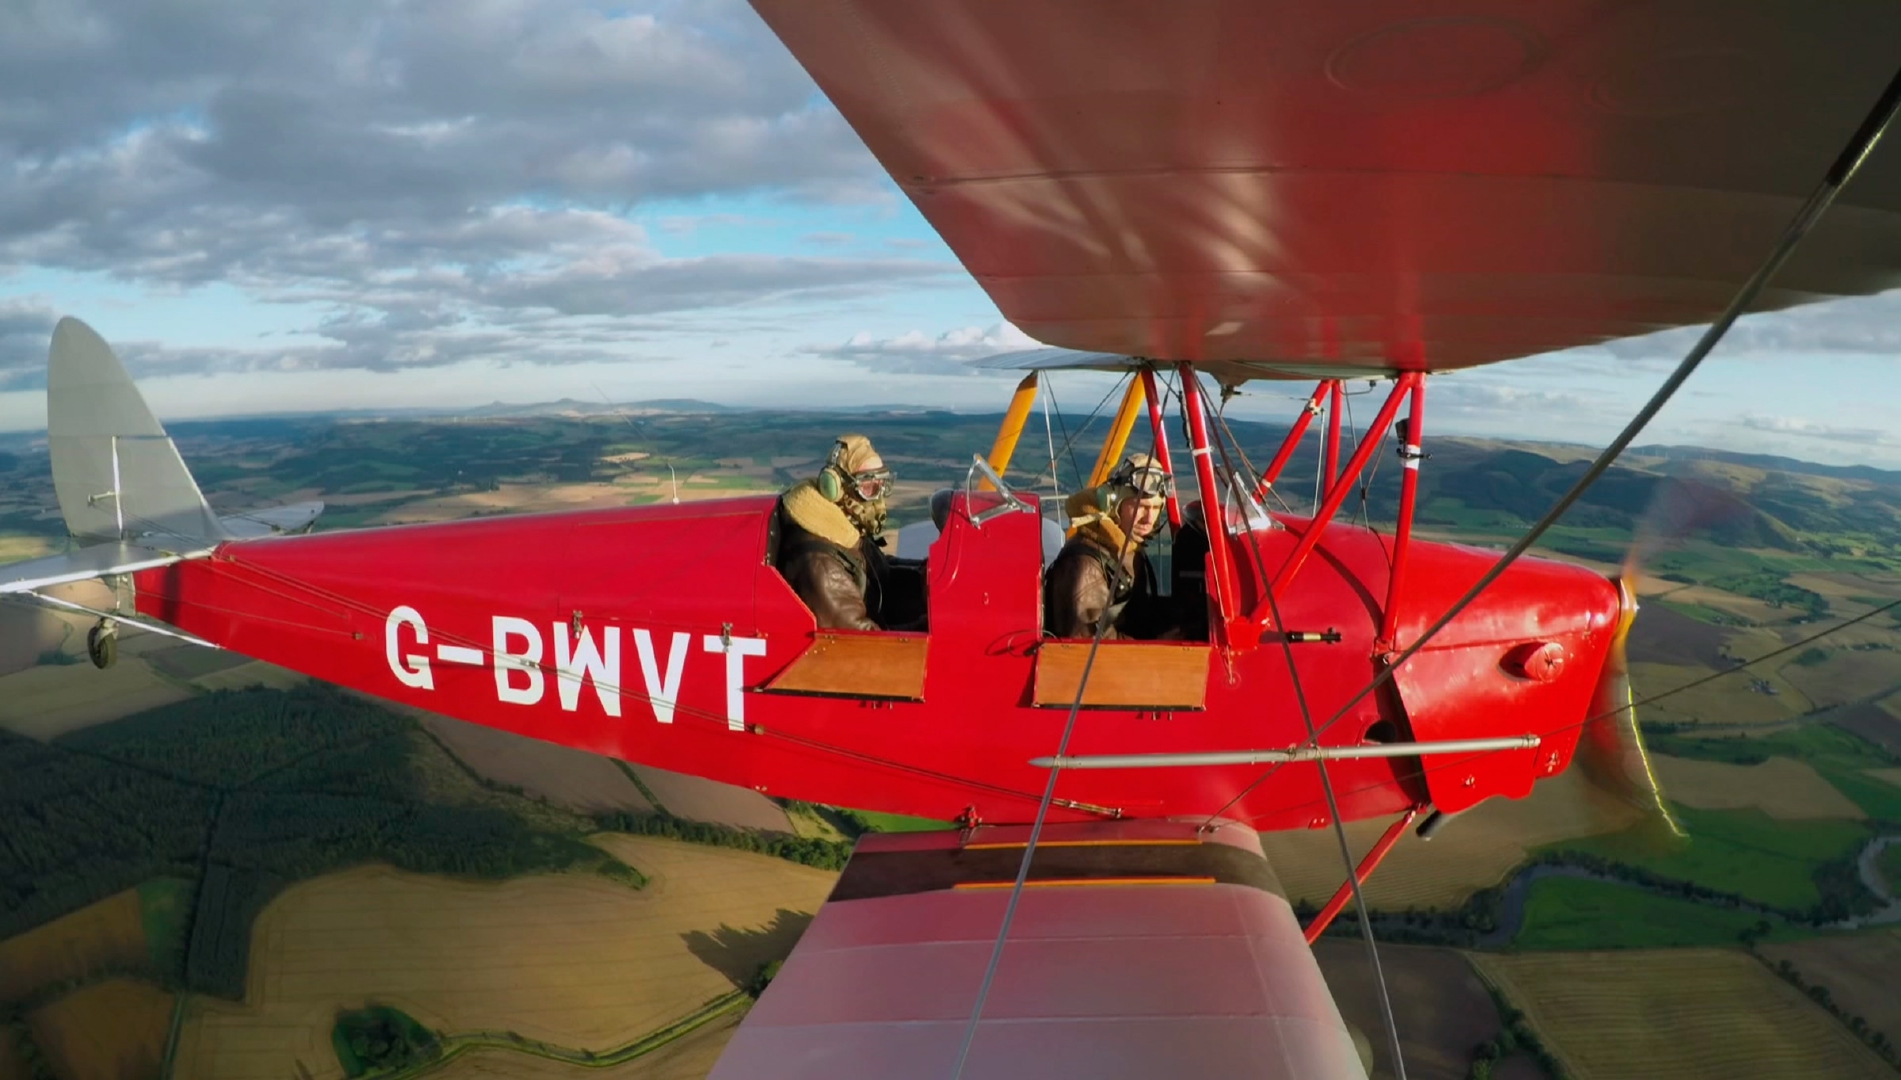 James Crawford in a 1945 Tiger Moth biplane, flying over the Strathearn Valley.